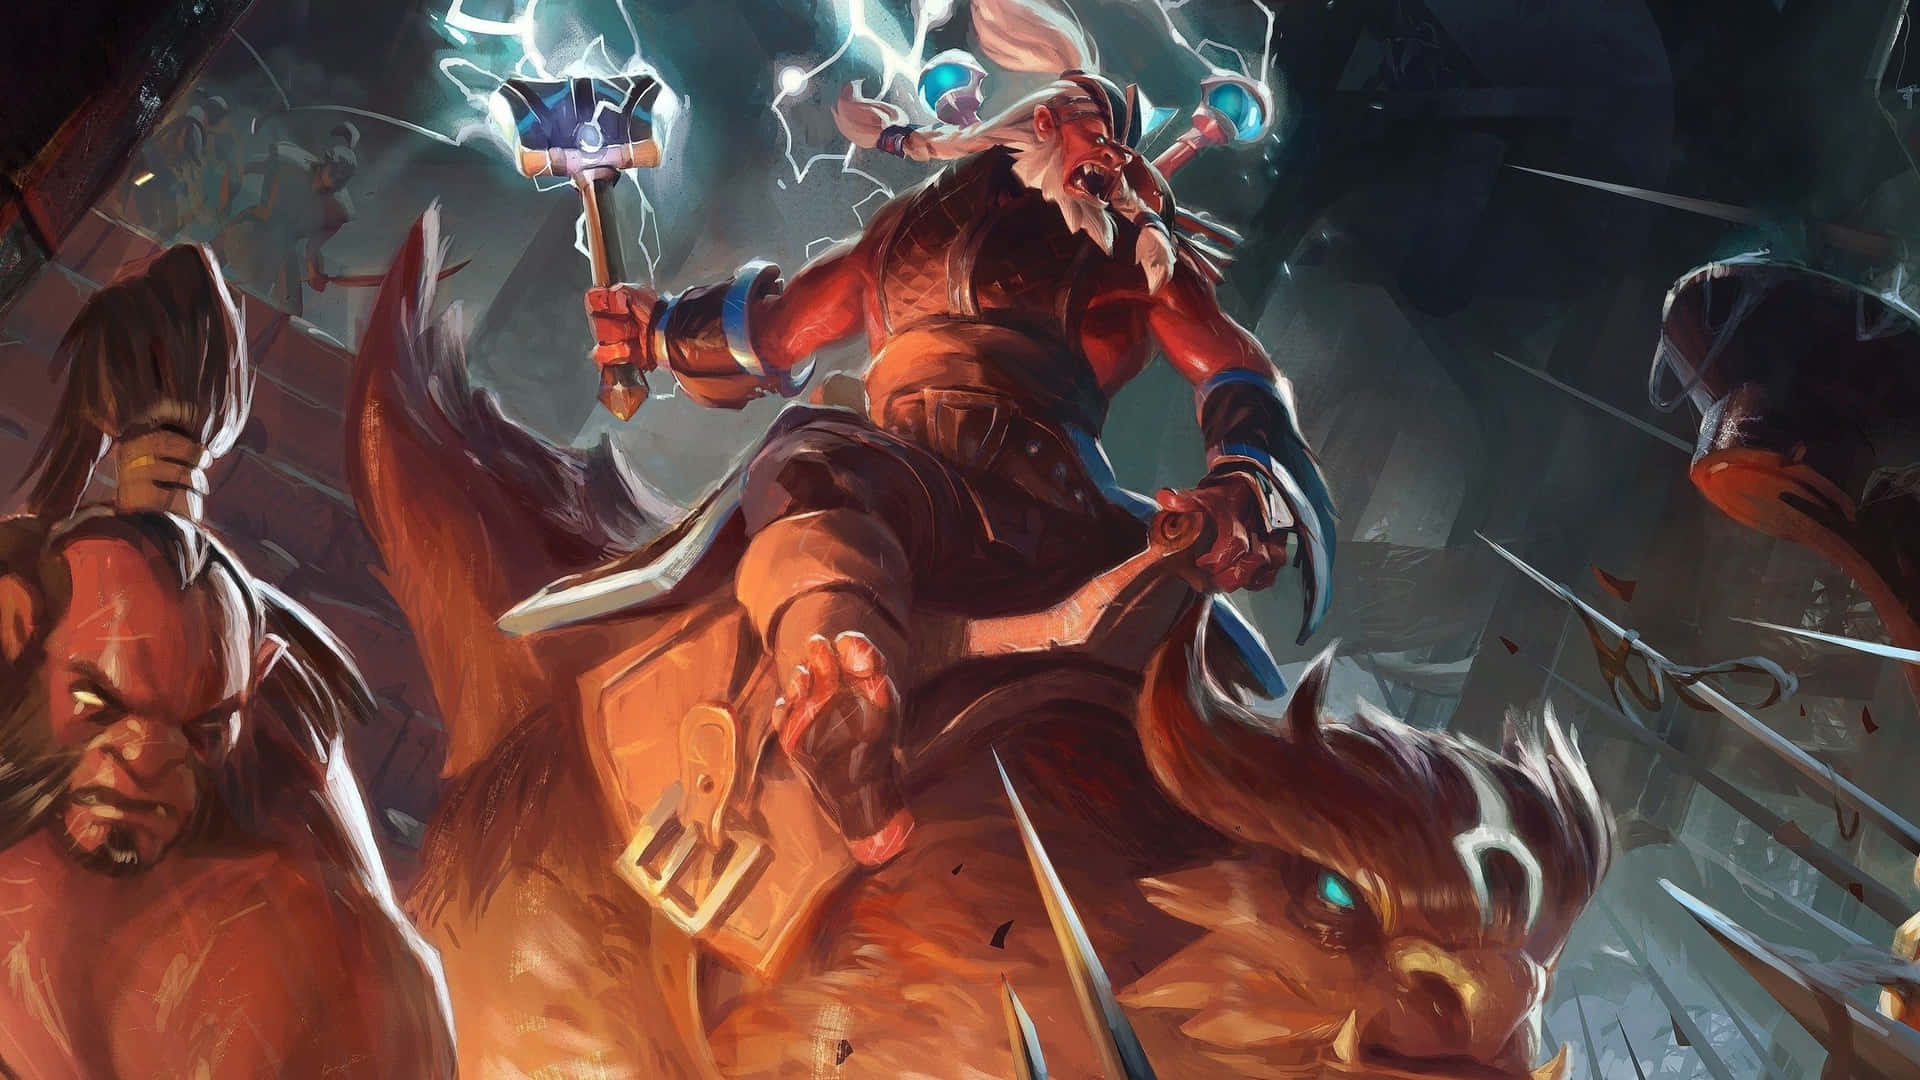 2440x1440 Dota 2 Background The Disruptor Fighting With Axe Background